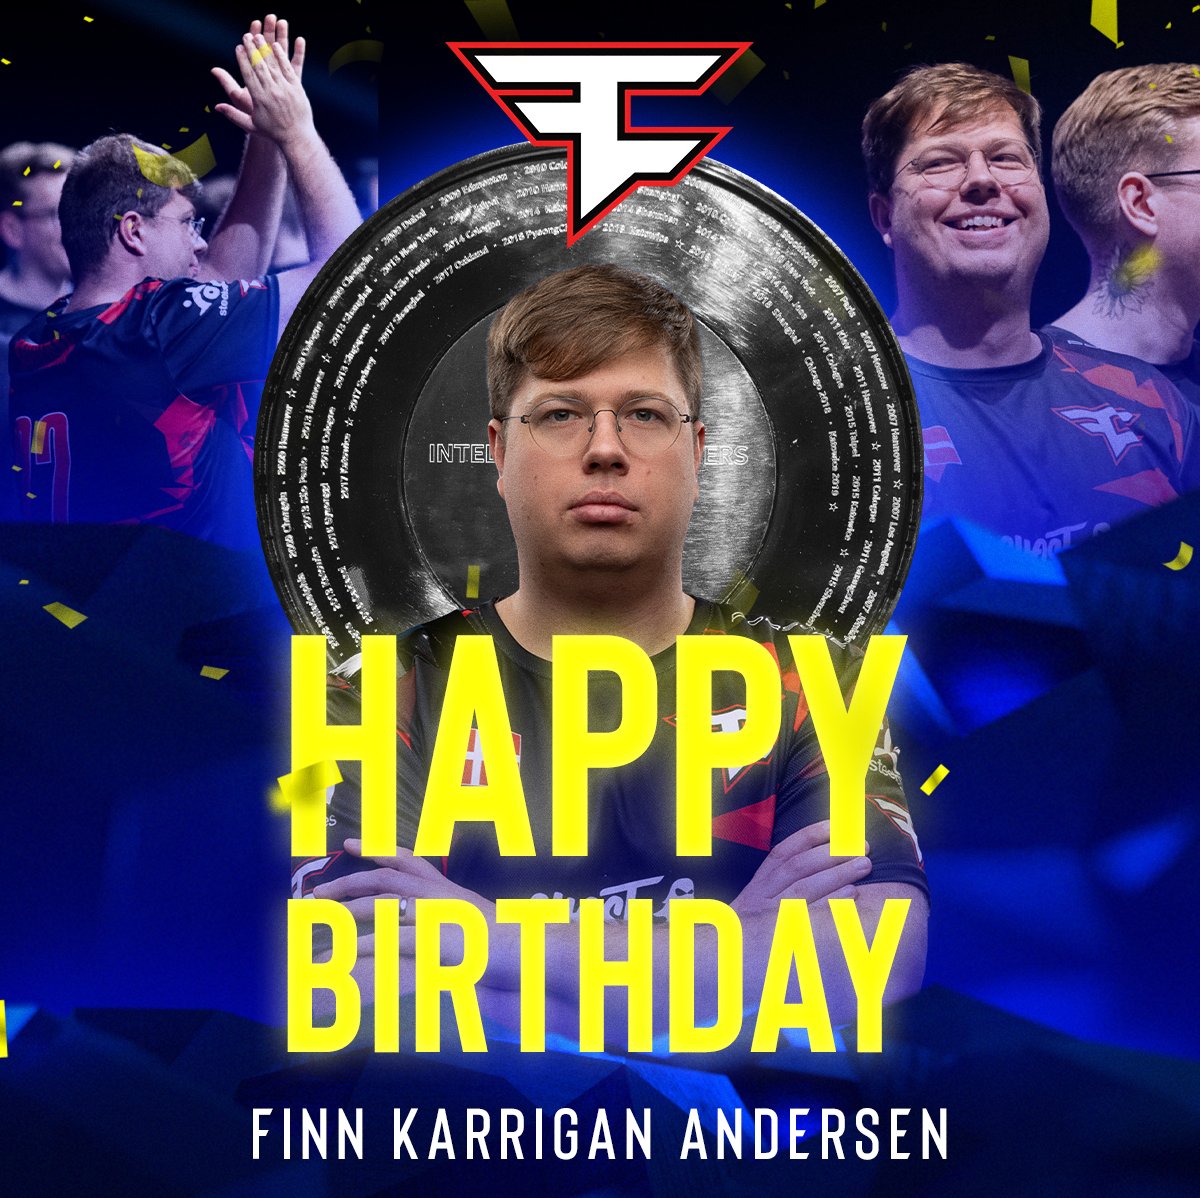 Please join us in wishing a very happy birthday to one of our #IEM Chengdu champions @karriganCSGO 🥳 The showman, the GOAT IGL and still winning tournaments at 34. Here's to many more years leading the best teams in Counter-Strike ❤️